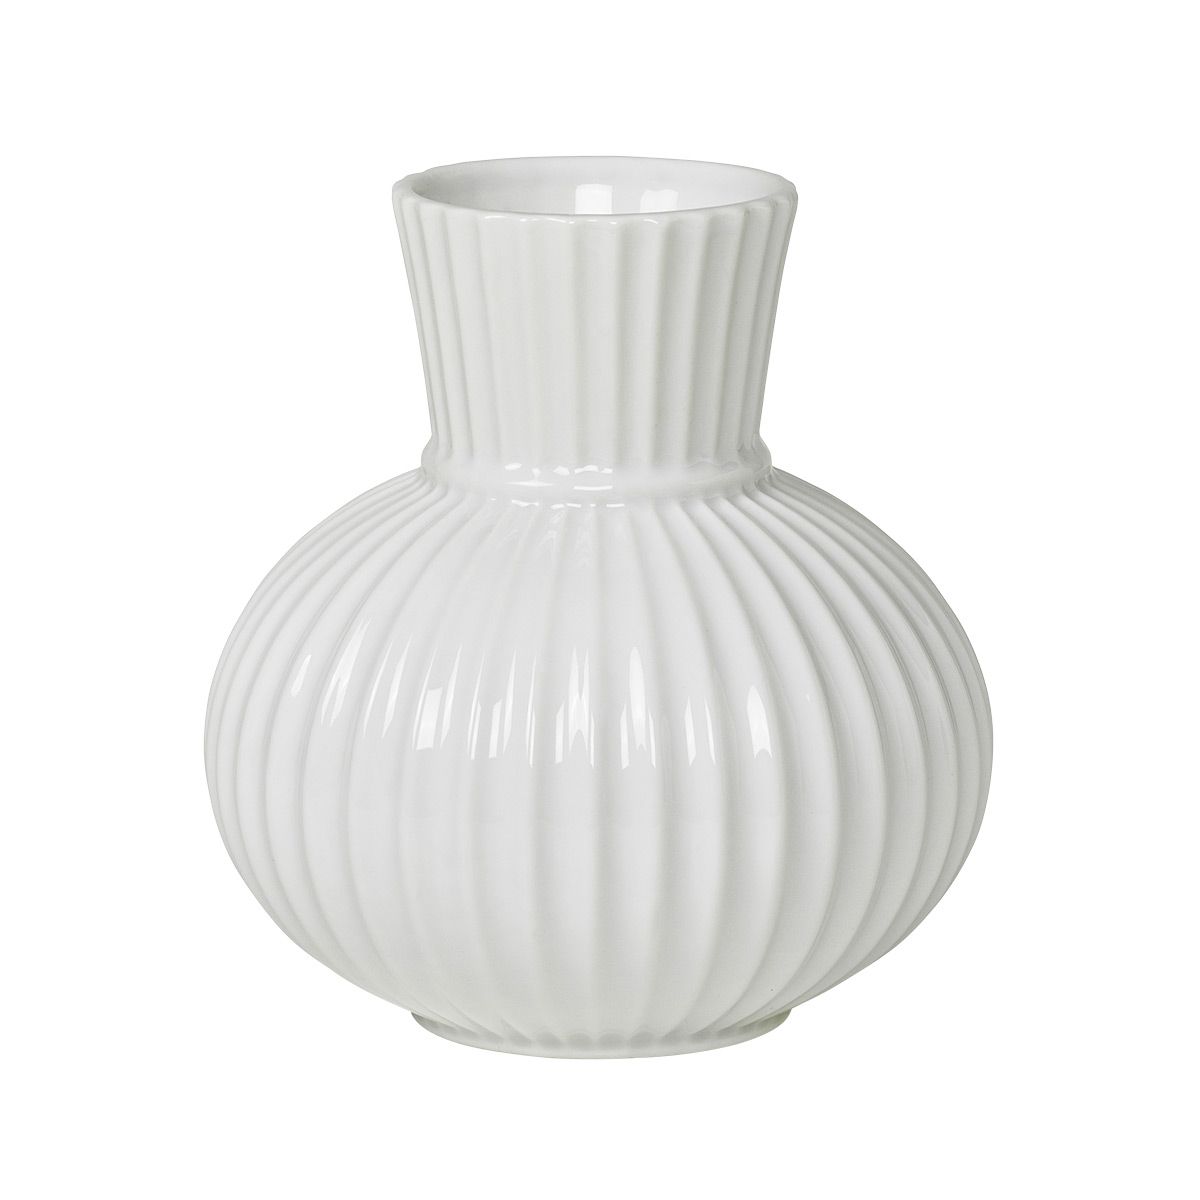 Lyngby Porcelain Tura Decorative Porcelain Vase White | The Container Store